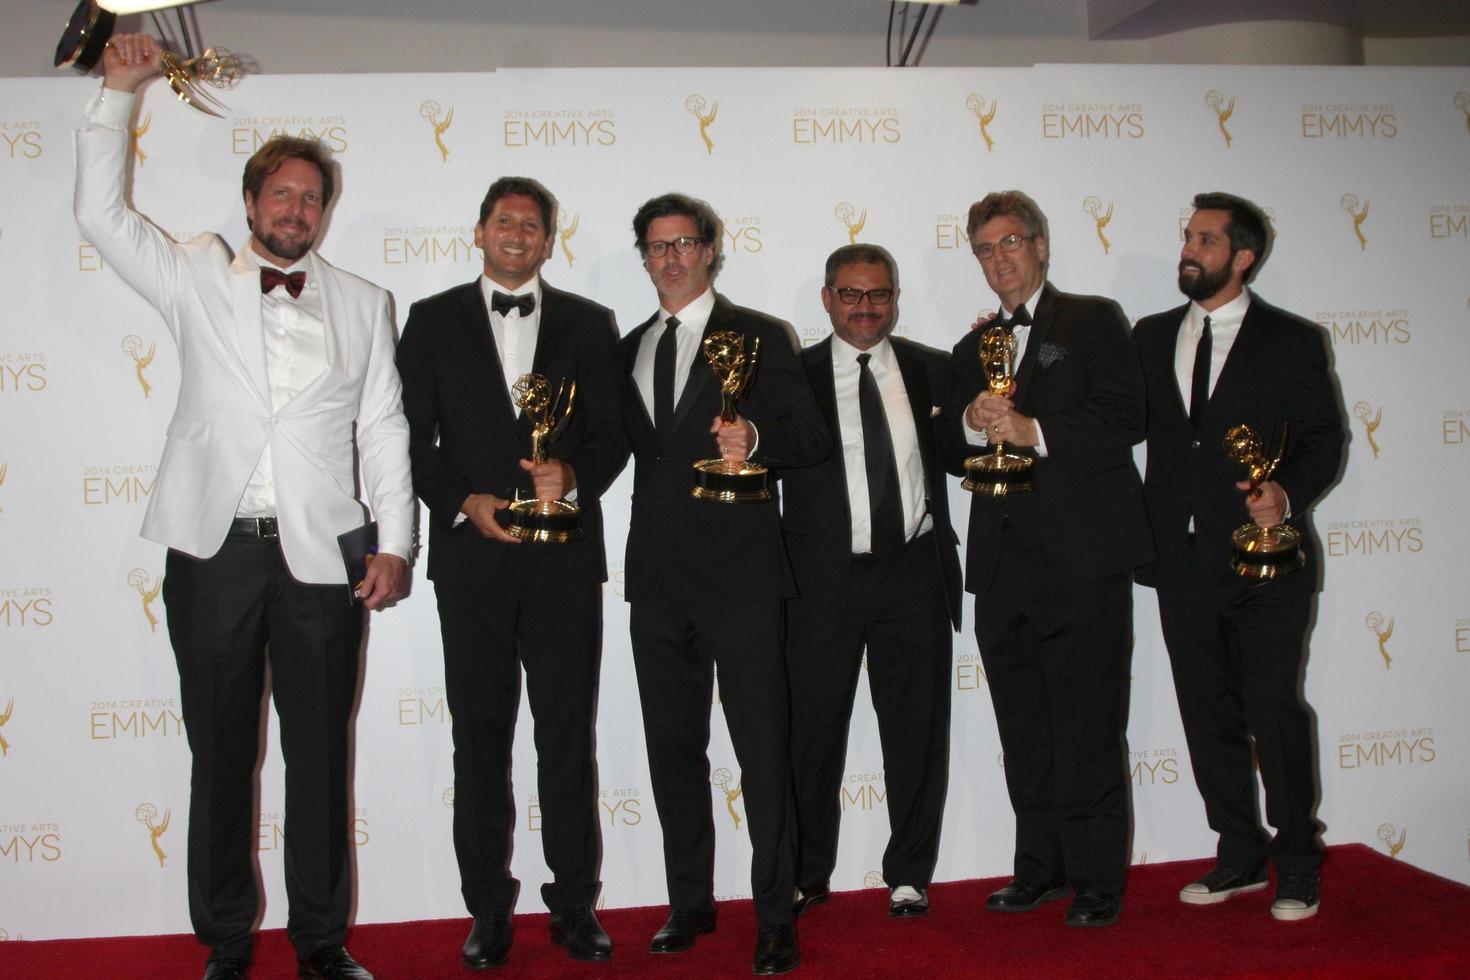 LOS ANGELES, AUG 16 - Outstanding Unstructured Reality Program, Deadliest Catch at the 2014 Creative Emmy Awards, Press Room at Nokia Theater on August 16, 2014 in Los Angeles, CA photo